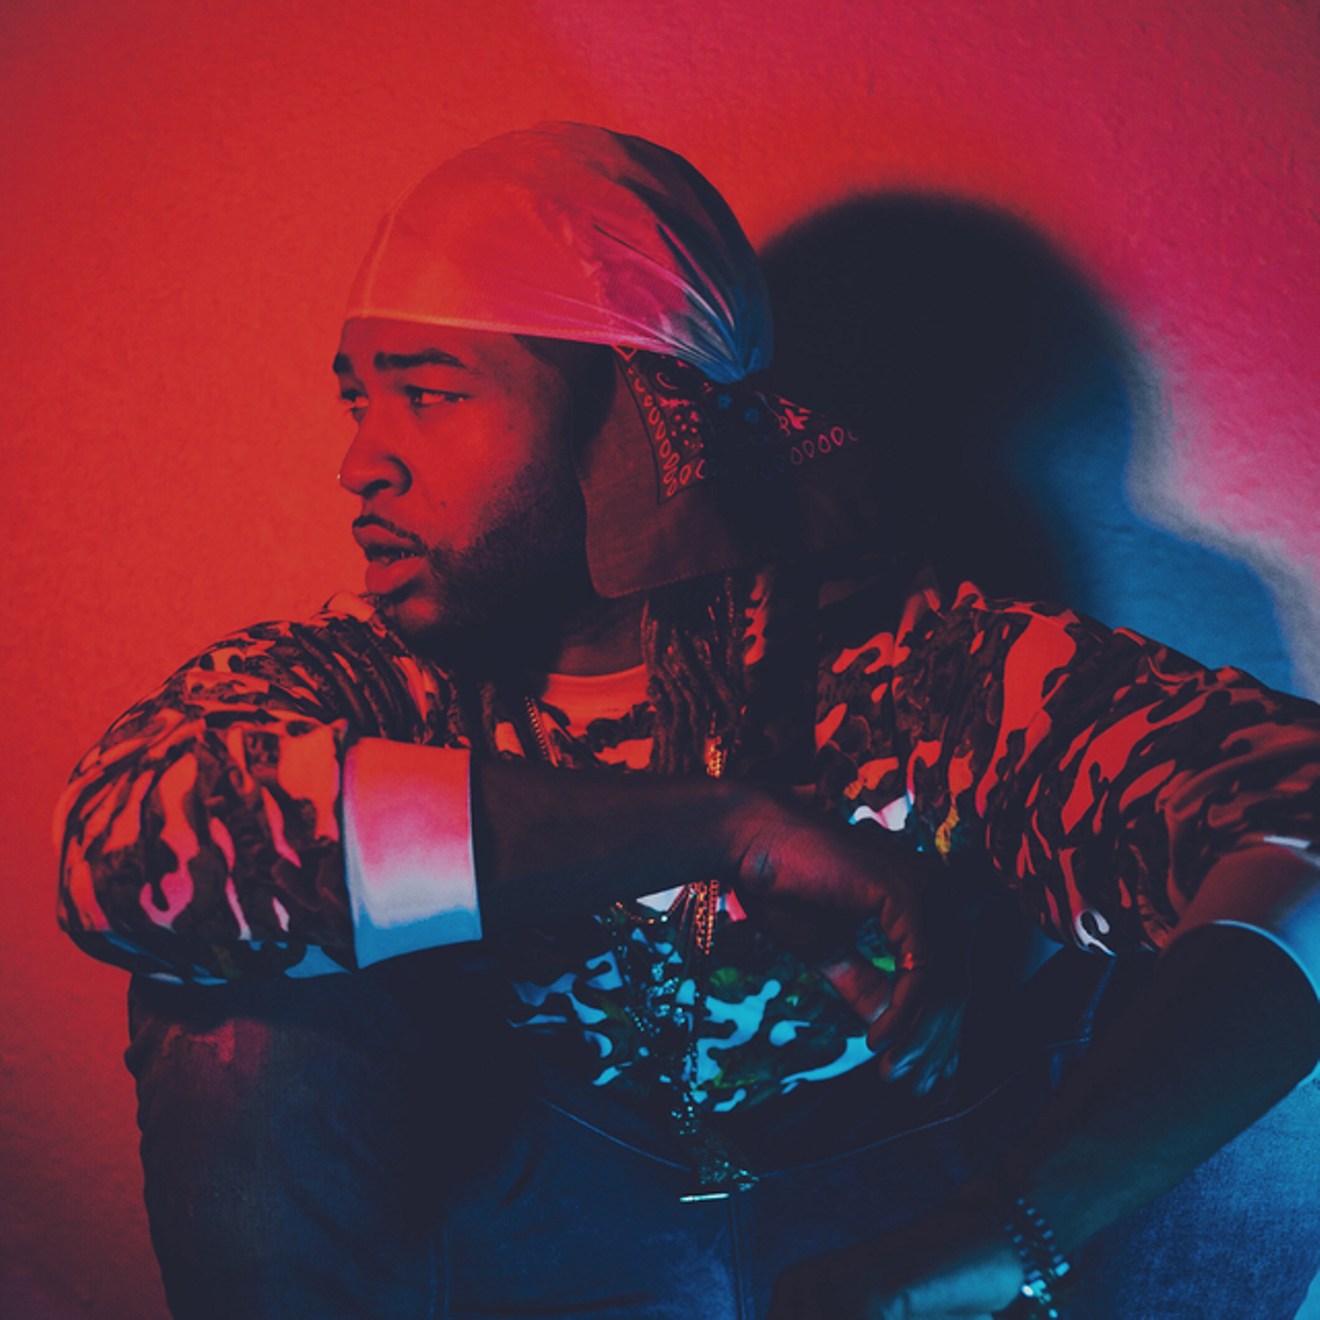 Canadian R&B singer PARTYNEXTDOOR will touch down in Dallas this summer.